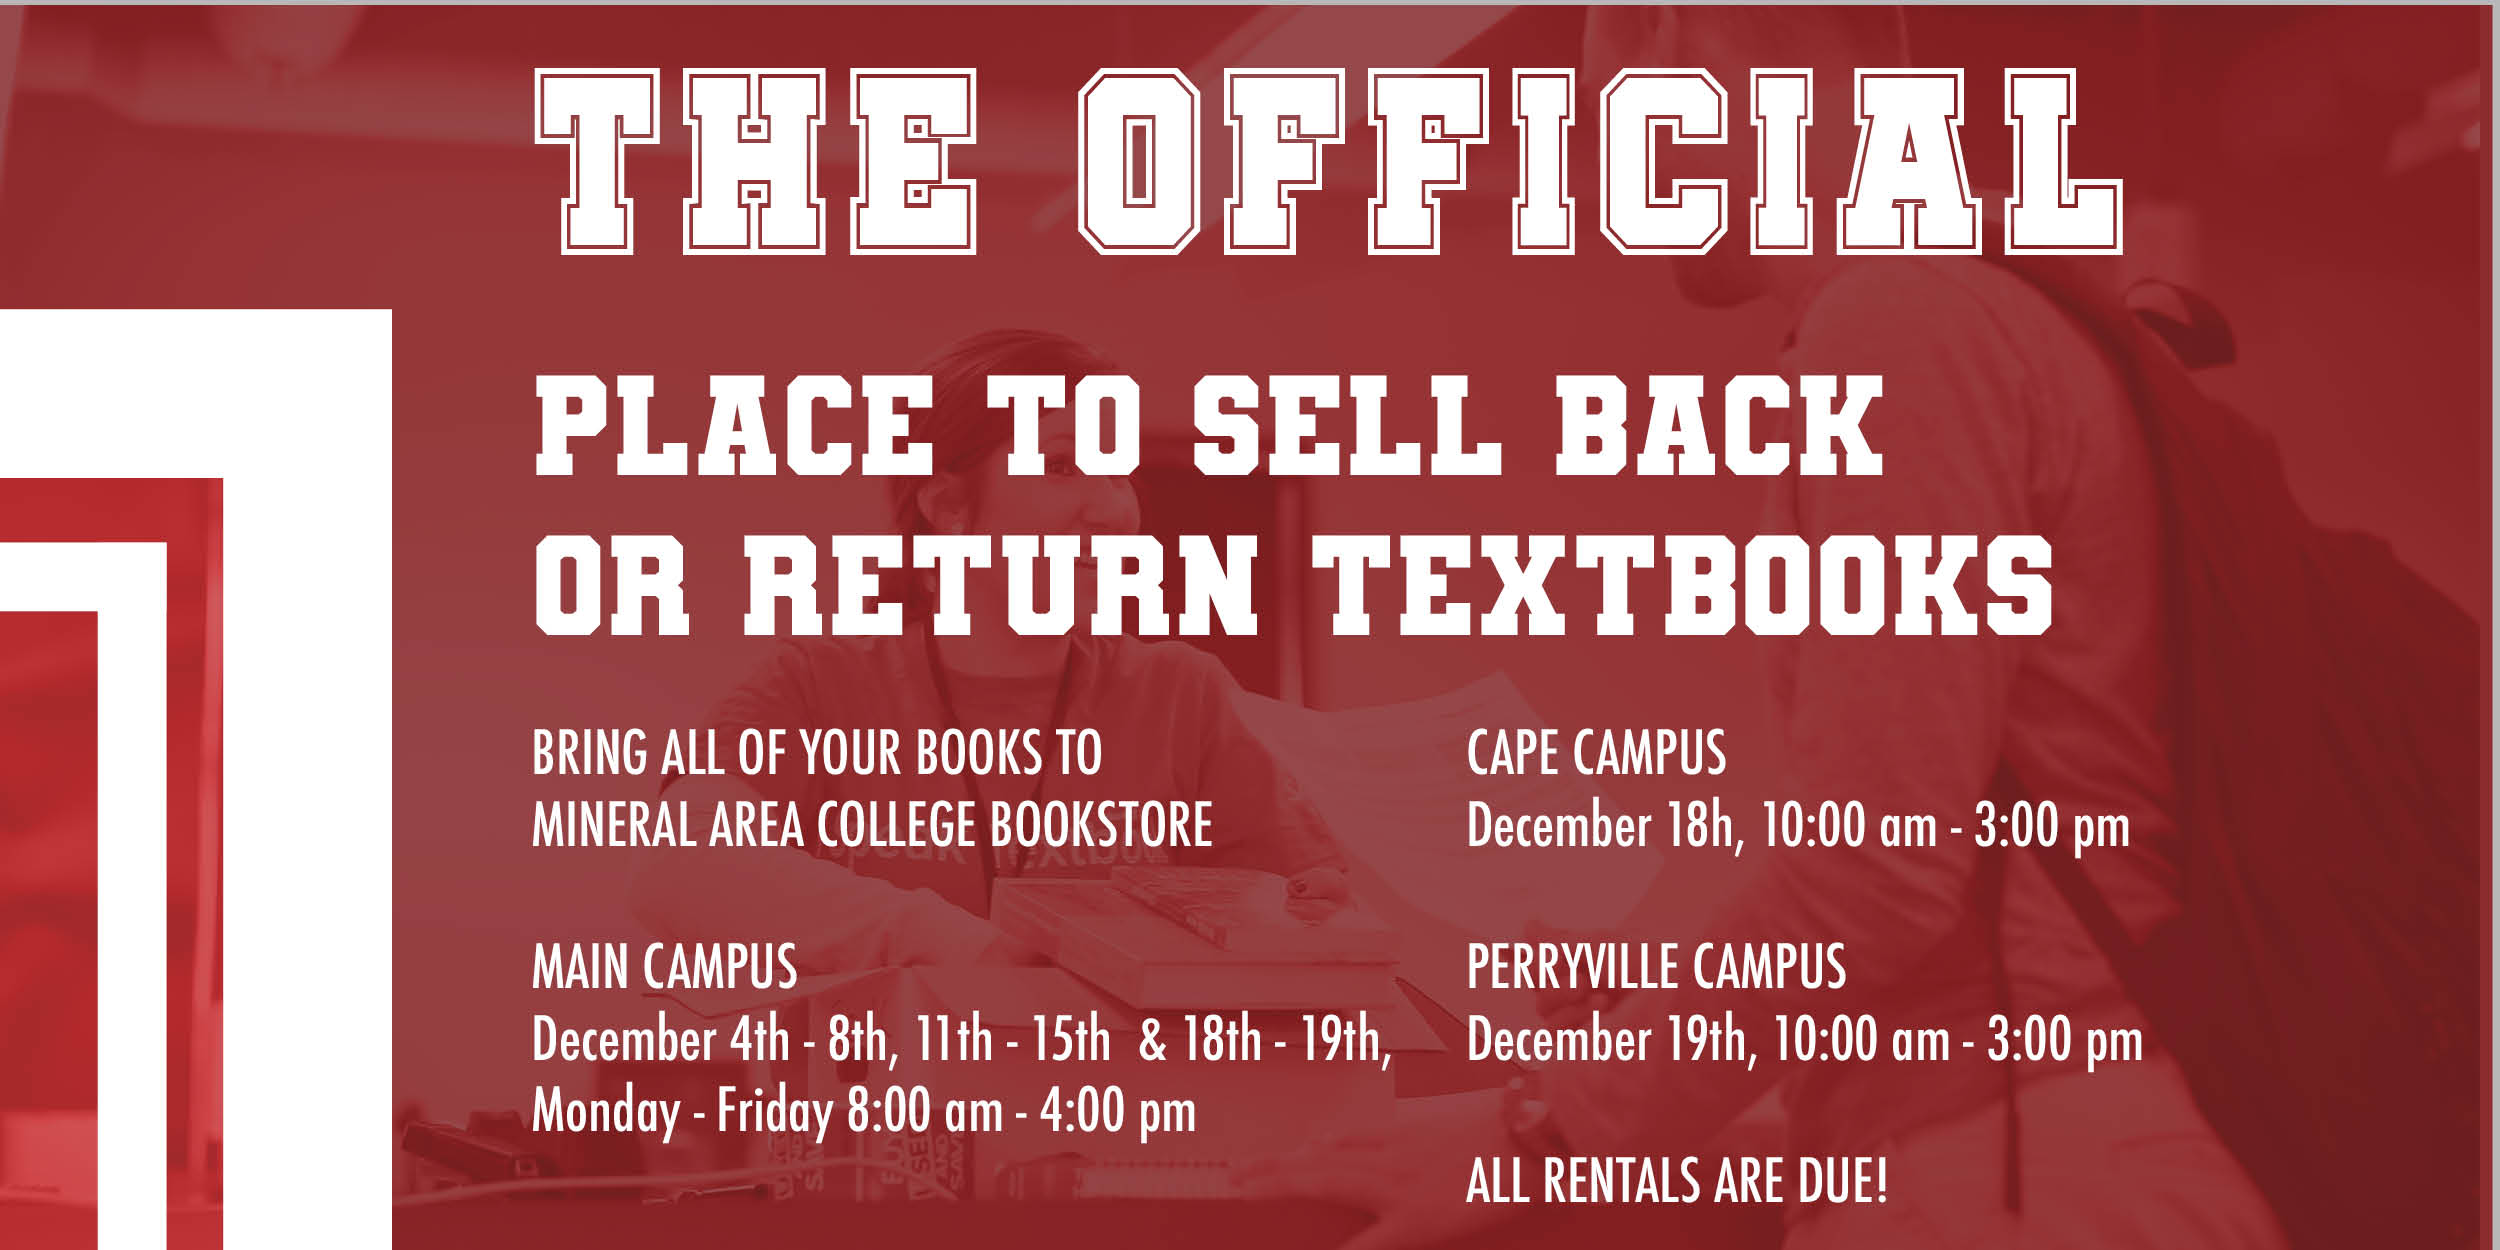 On campus buyback. Cape Campus - December 18th 10am to 3pm. Perryville campus - December 19th 10am to 3pm